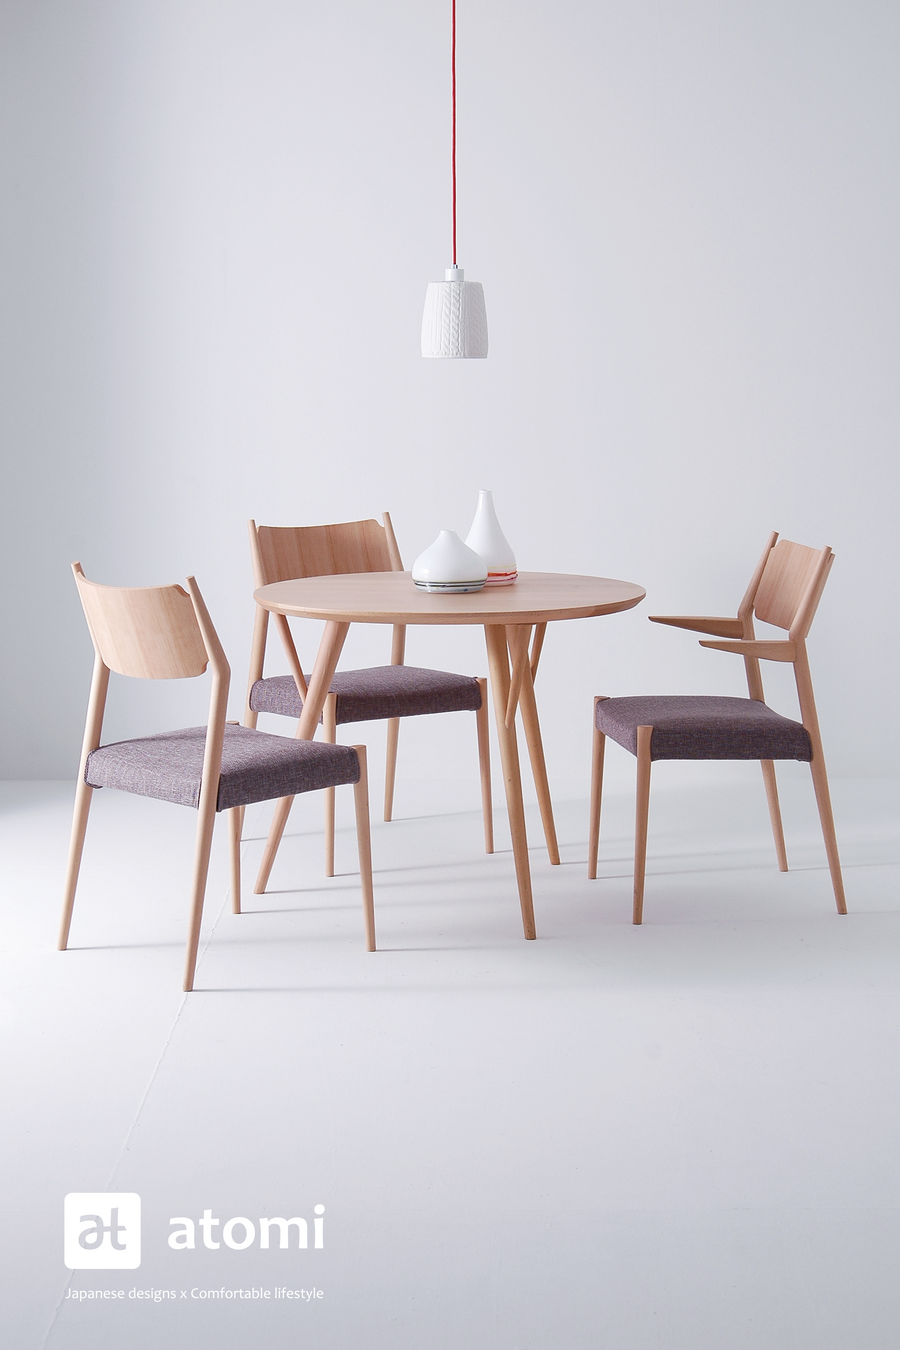 Forms K-Type Dining Chair - atomi shop